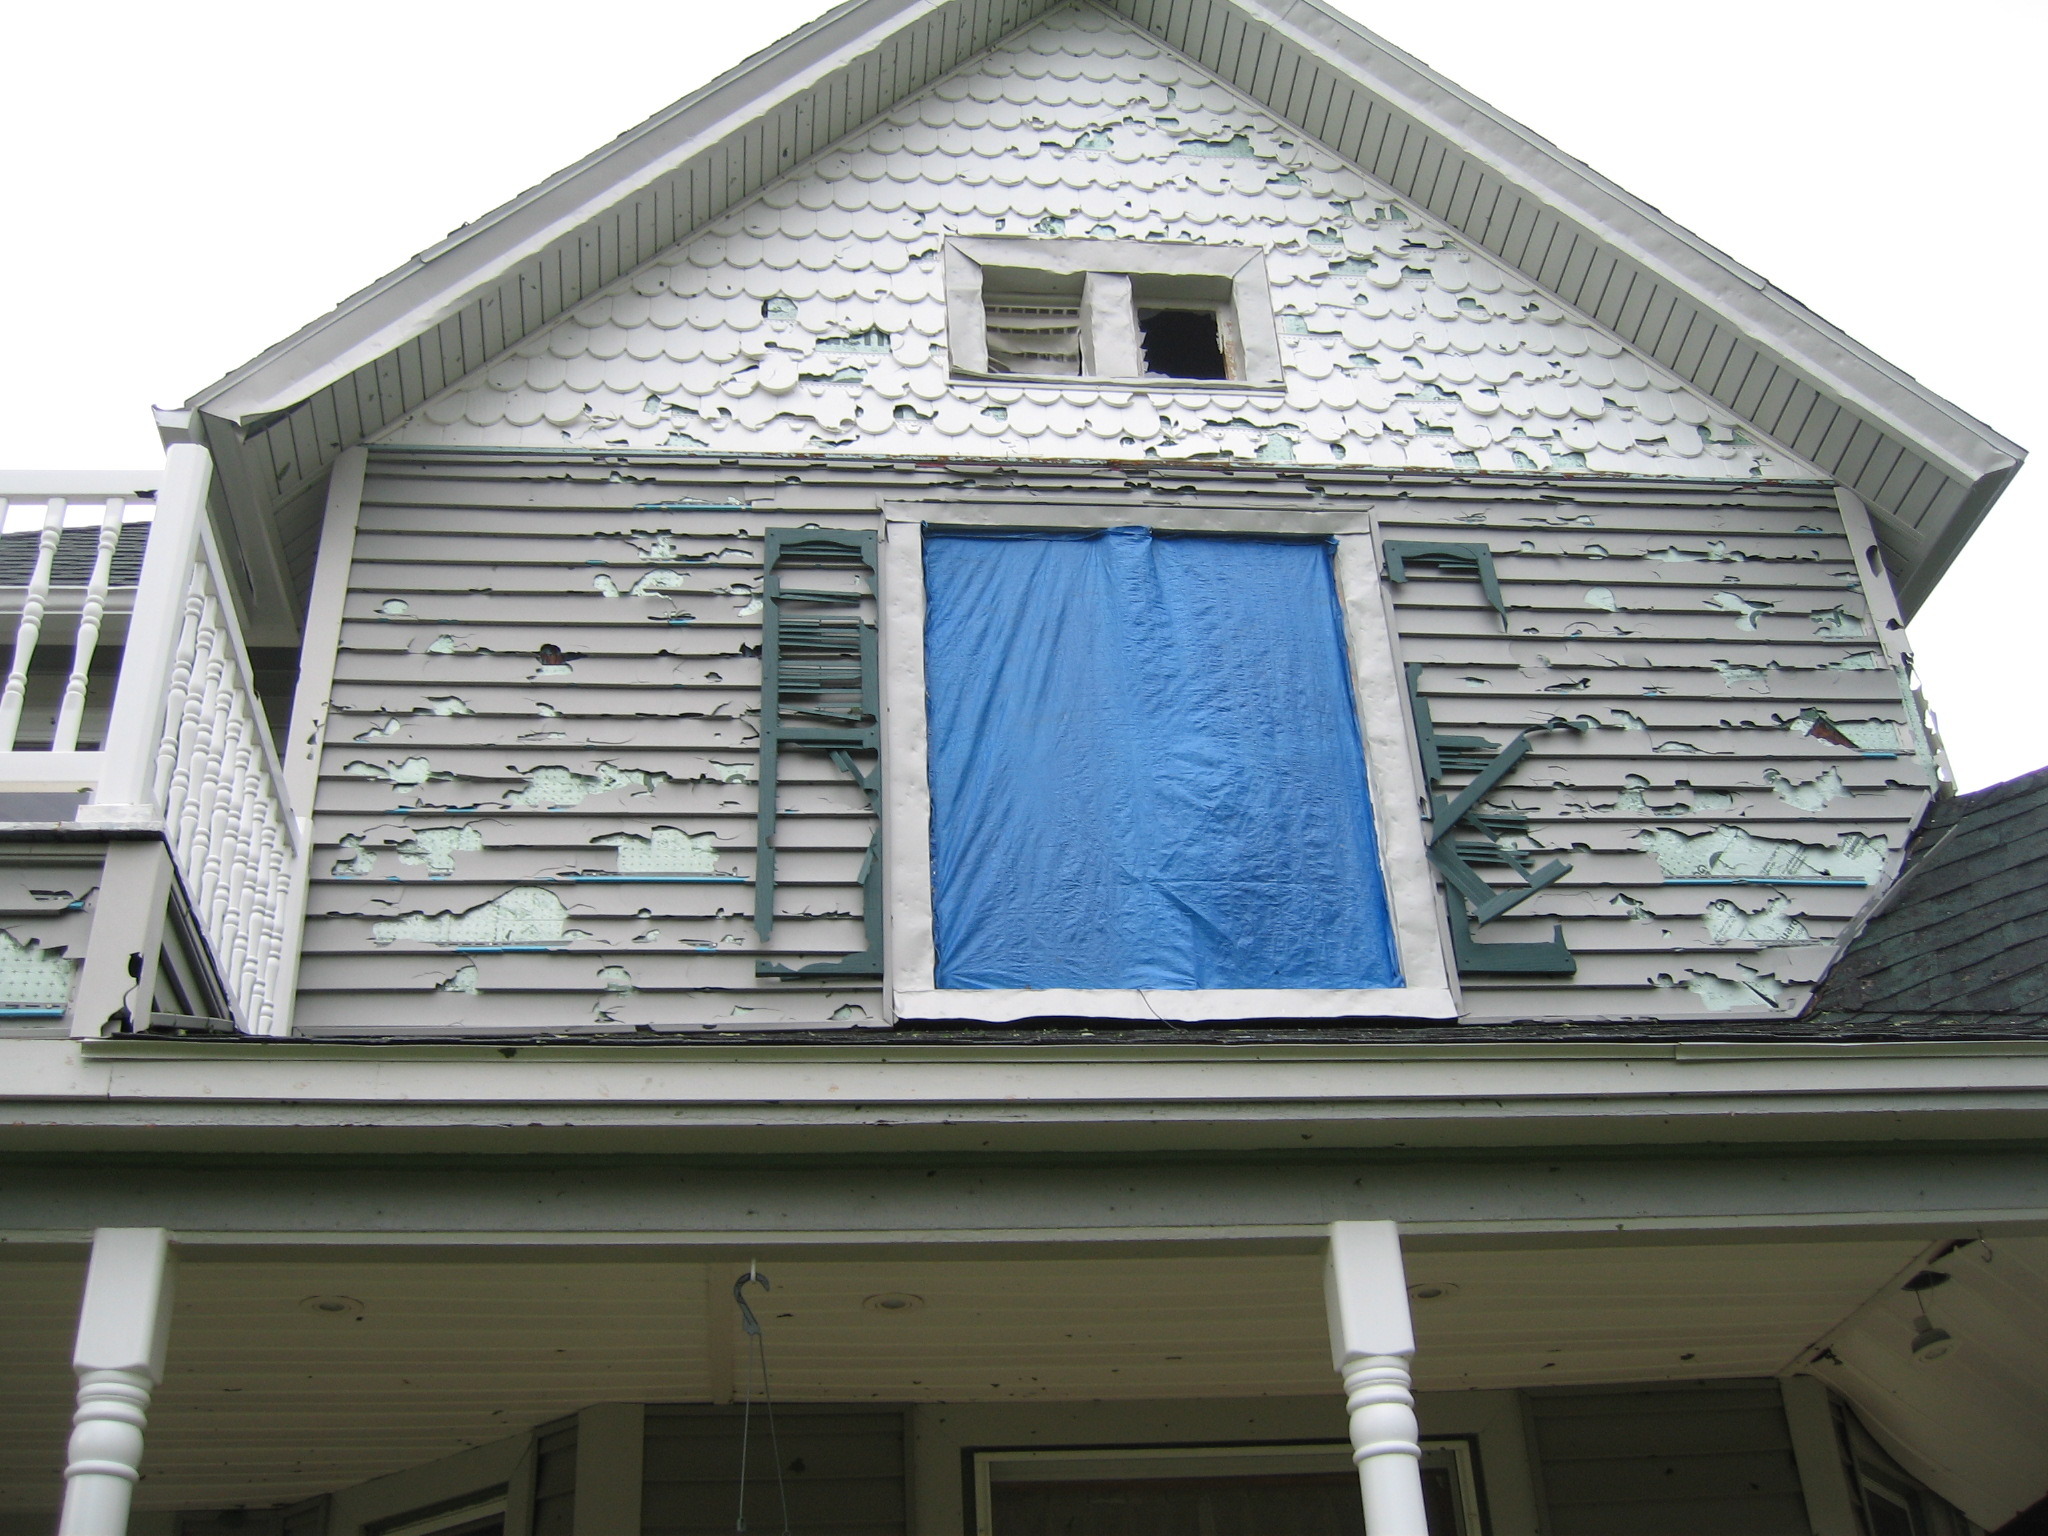 Siding damage from wind-driven hail in Eldora